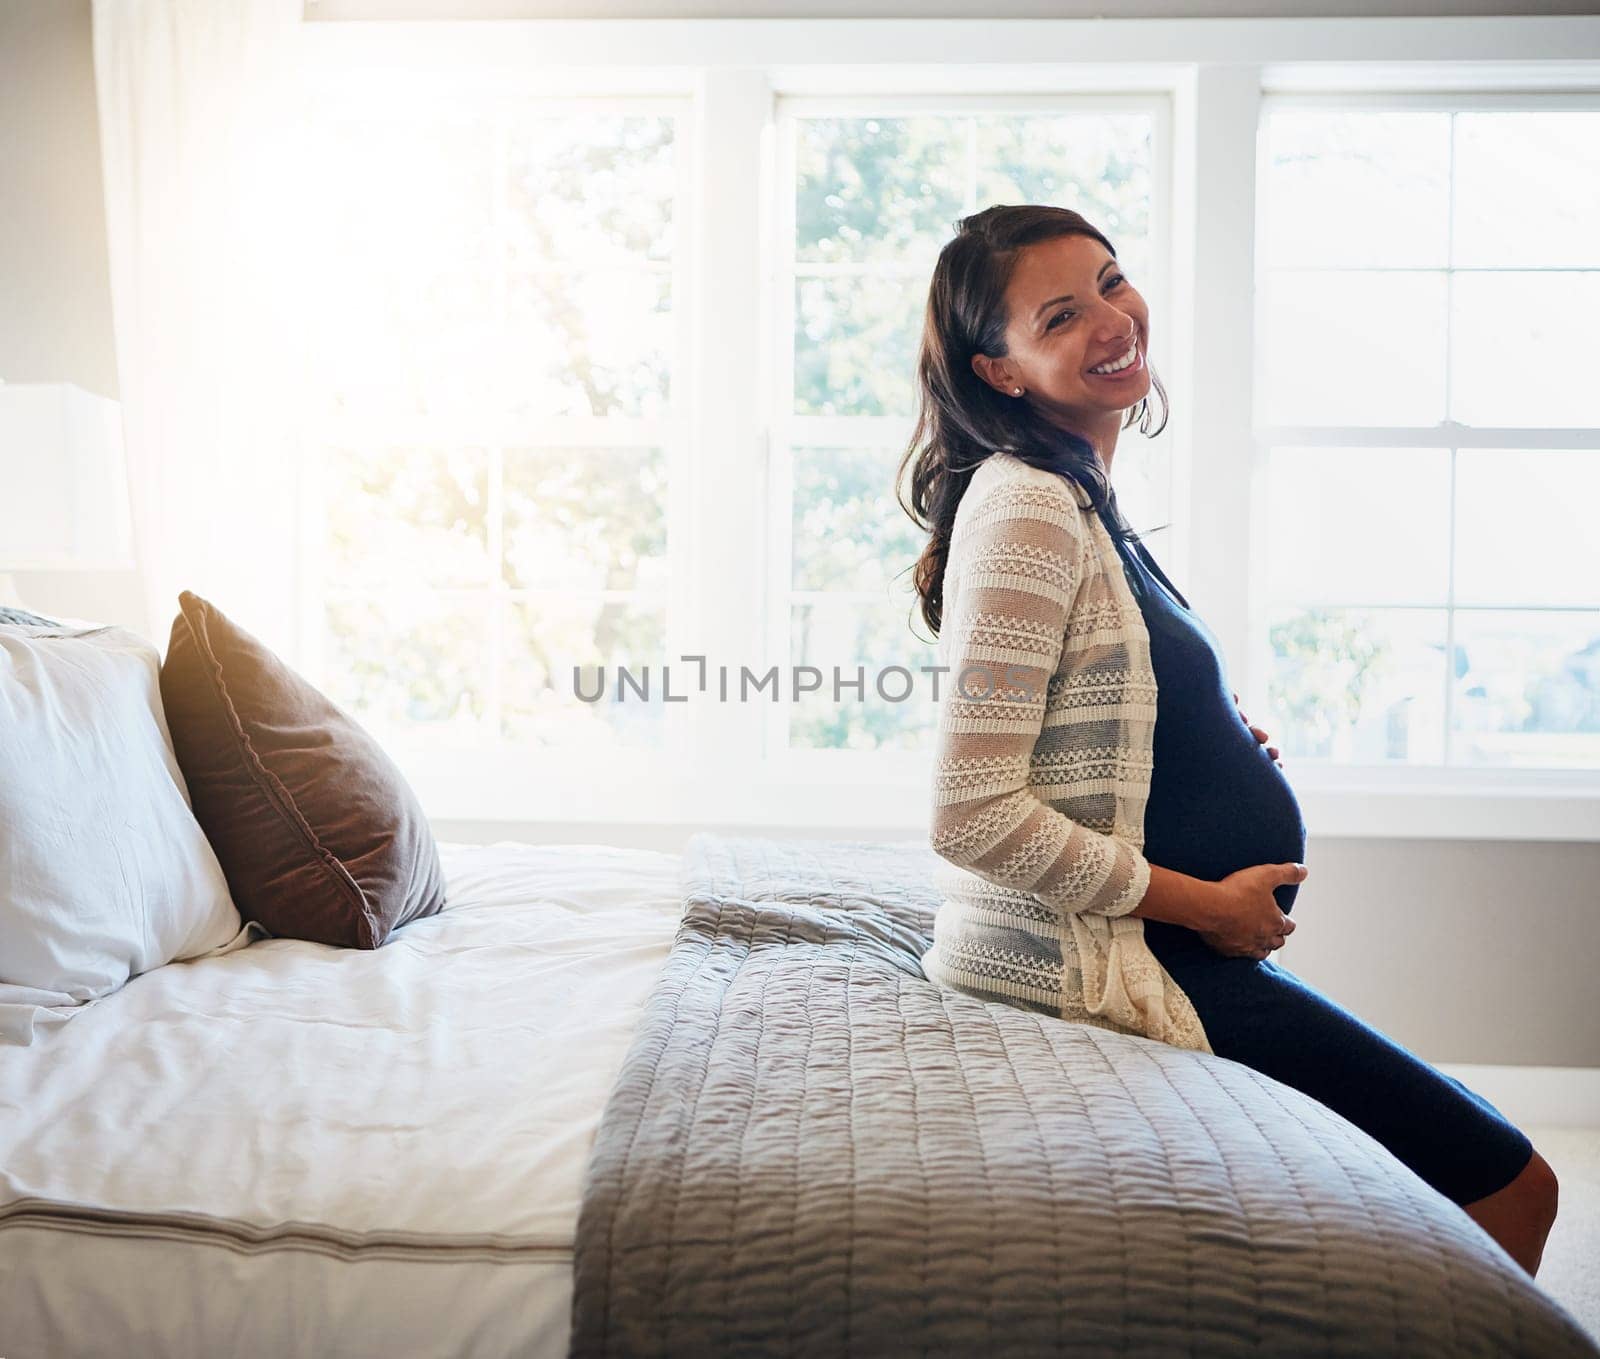 Home bed, happiness and woman pregnancy, massage stomach and mom happy for baby support, development or care. Expectation, bedroom flare and pregnant mother smile, love and relax on maternity leave.